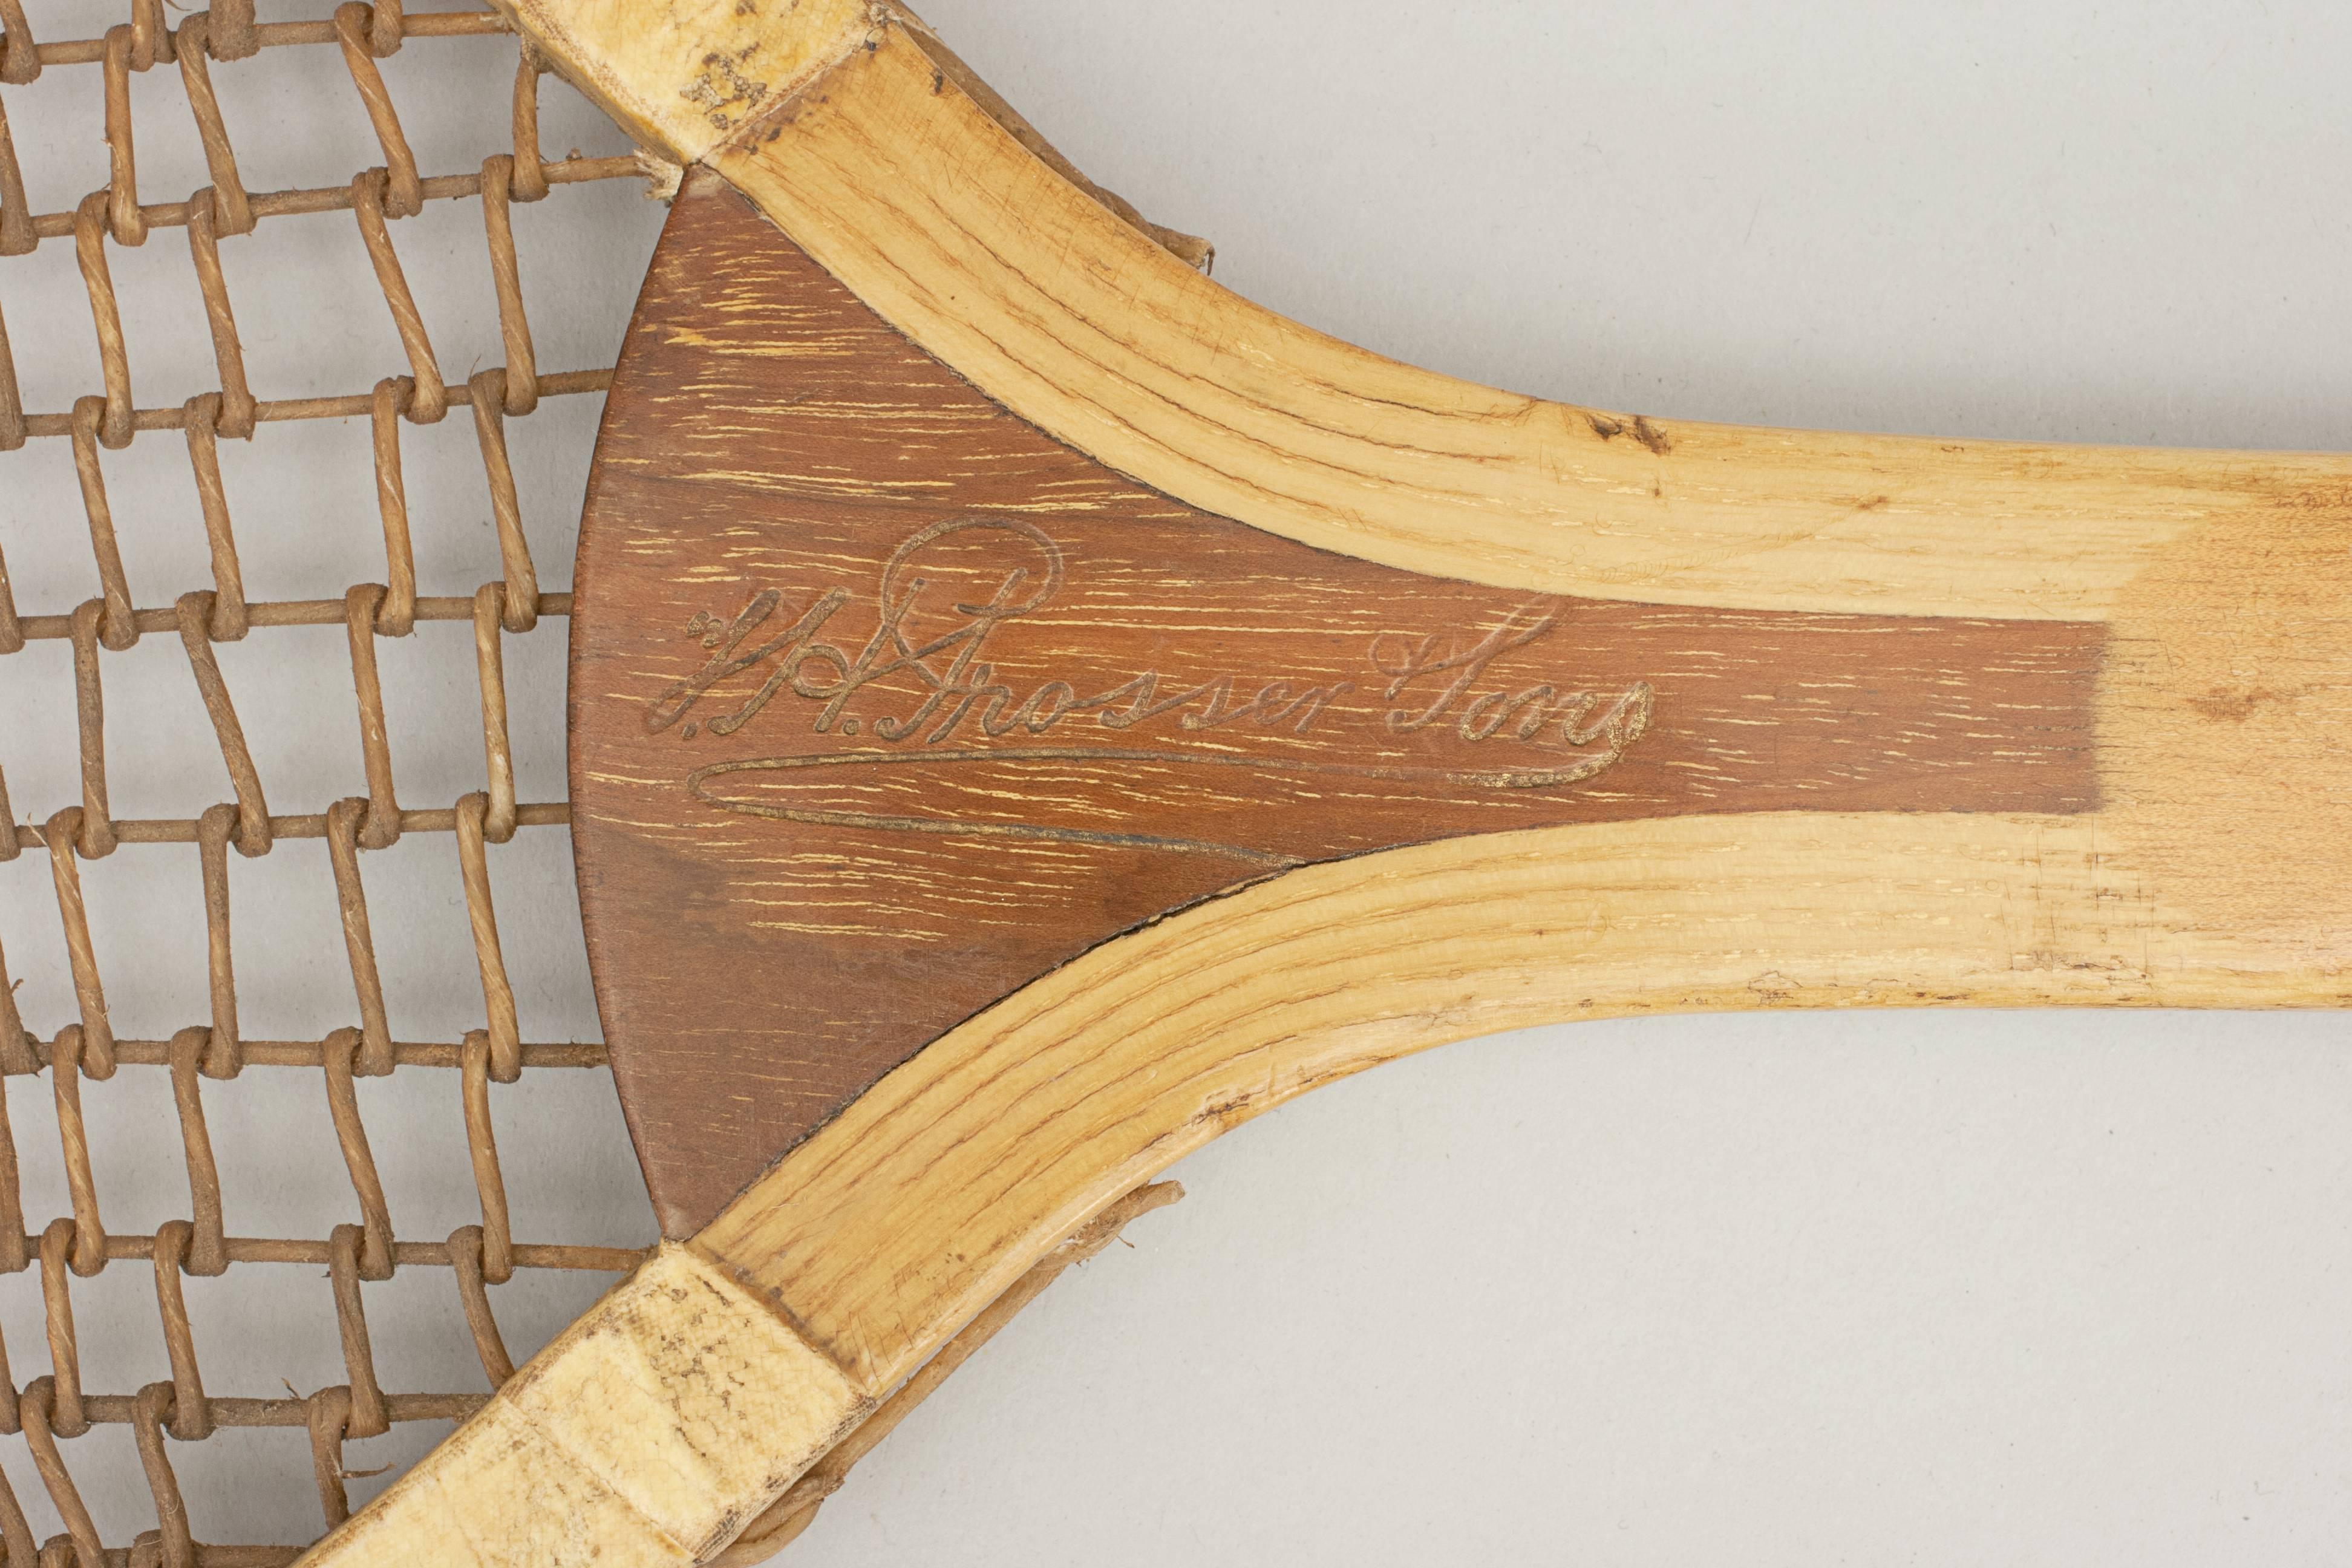 Vintage fish tail lawn tennis racket.
A fine example of a wooden framed lawn tennis racket made by T.H. Prosser & Sons. The racket has a nice clean ash frame with a walnut convex wedge embossed in gilt with 'Gale Barnstaple, T.H. Prosser & Sons'.